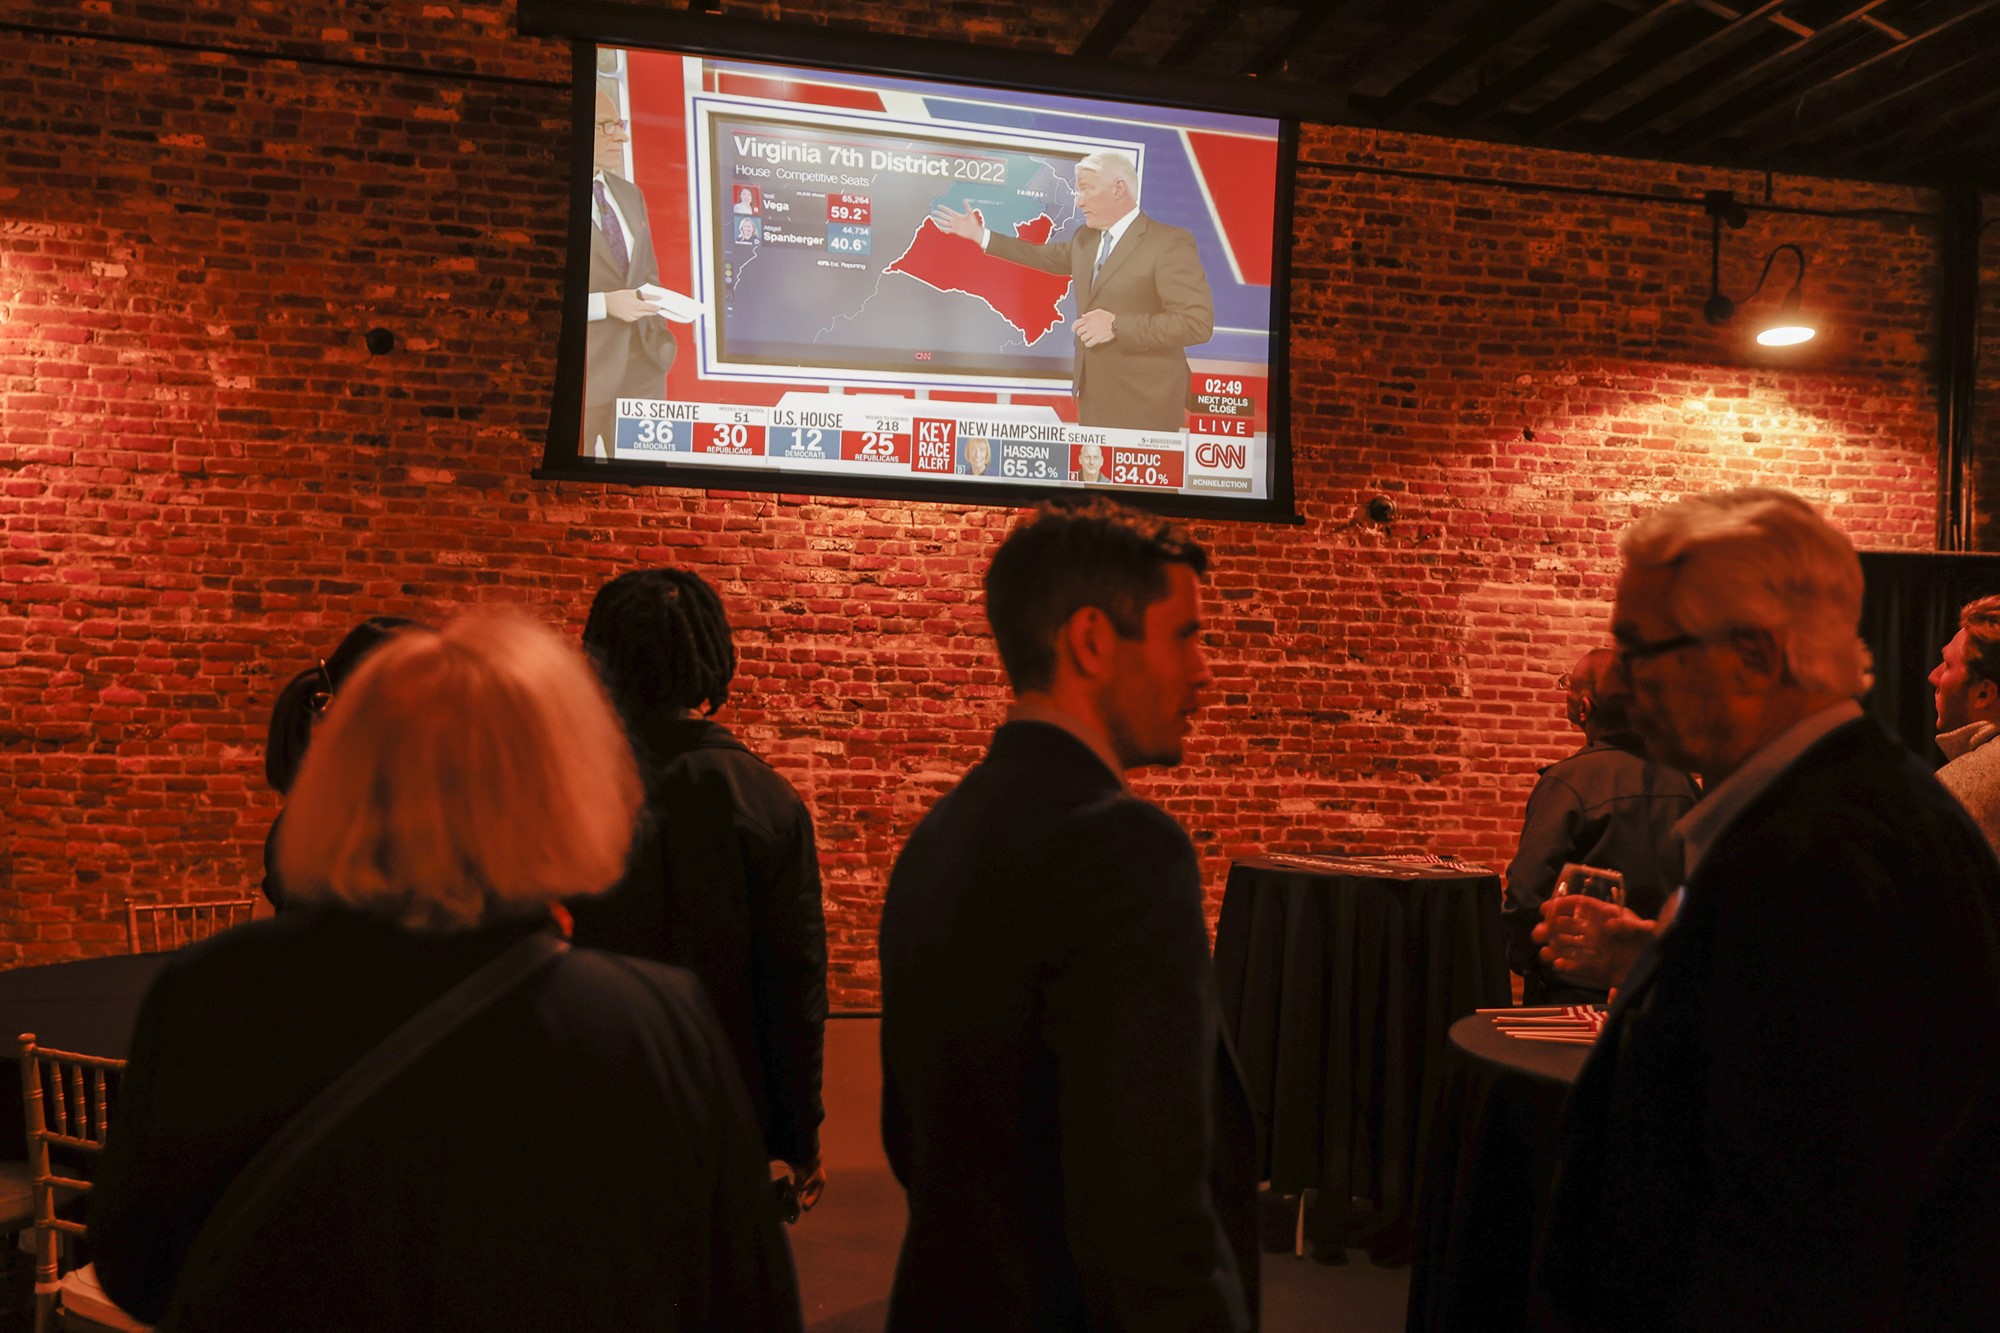 People stand around with drinks in a venue while a TV shows the midterms coverage.